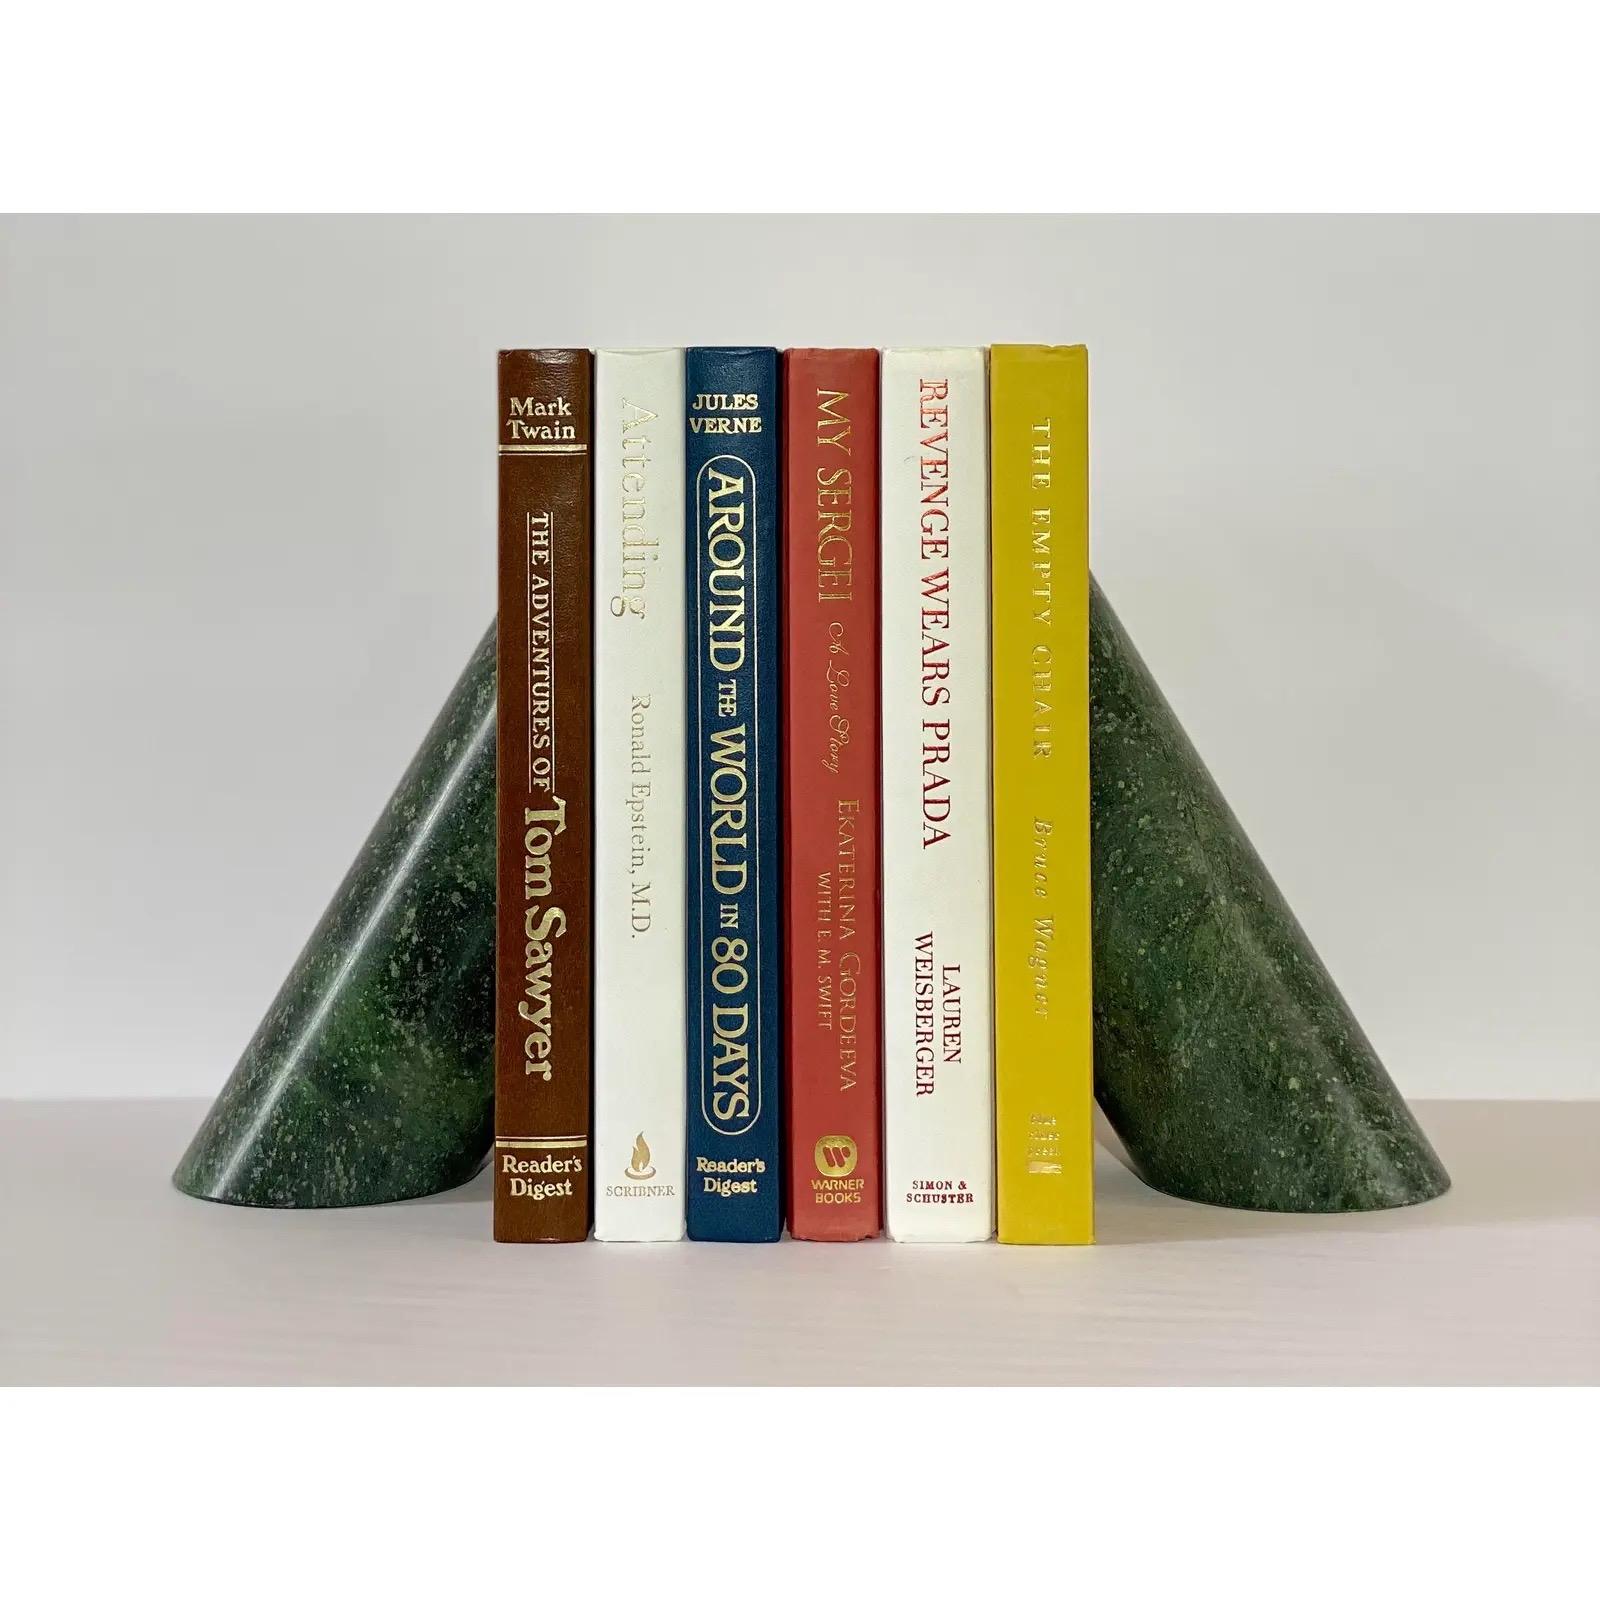 We are very pleased to offer a sculptural and functional pair of bookends, circa the 1970s. Constructed of dark green marble, the cylindrical shape features a diagonal cut on top and a smooth, polished surface. In excellent condition. Please see all